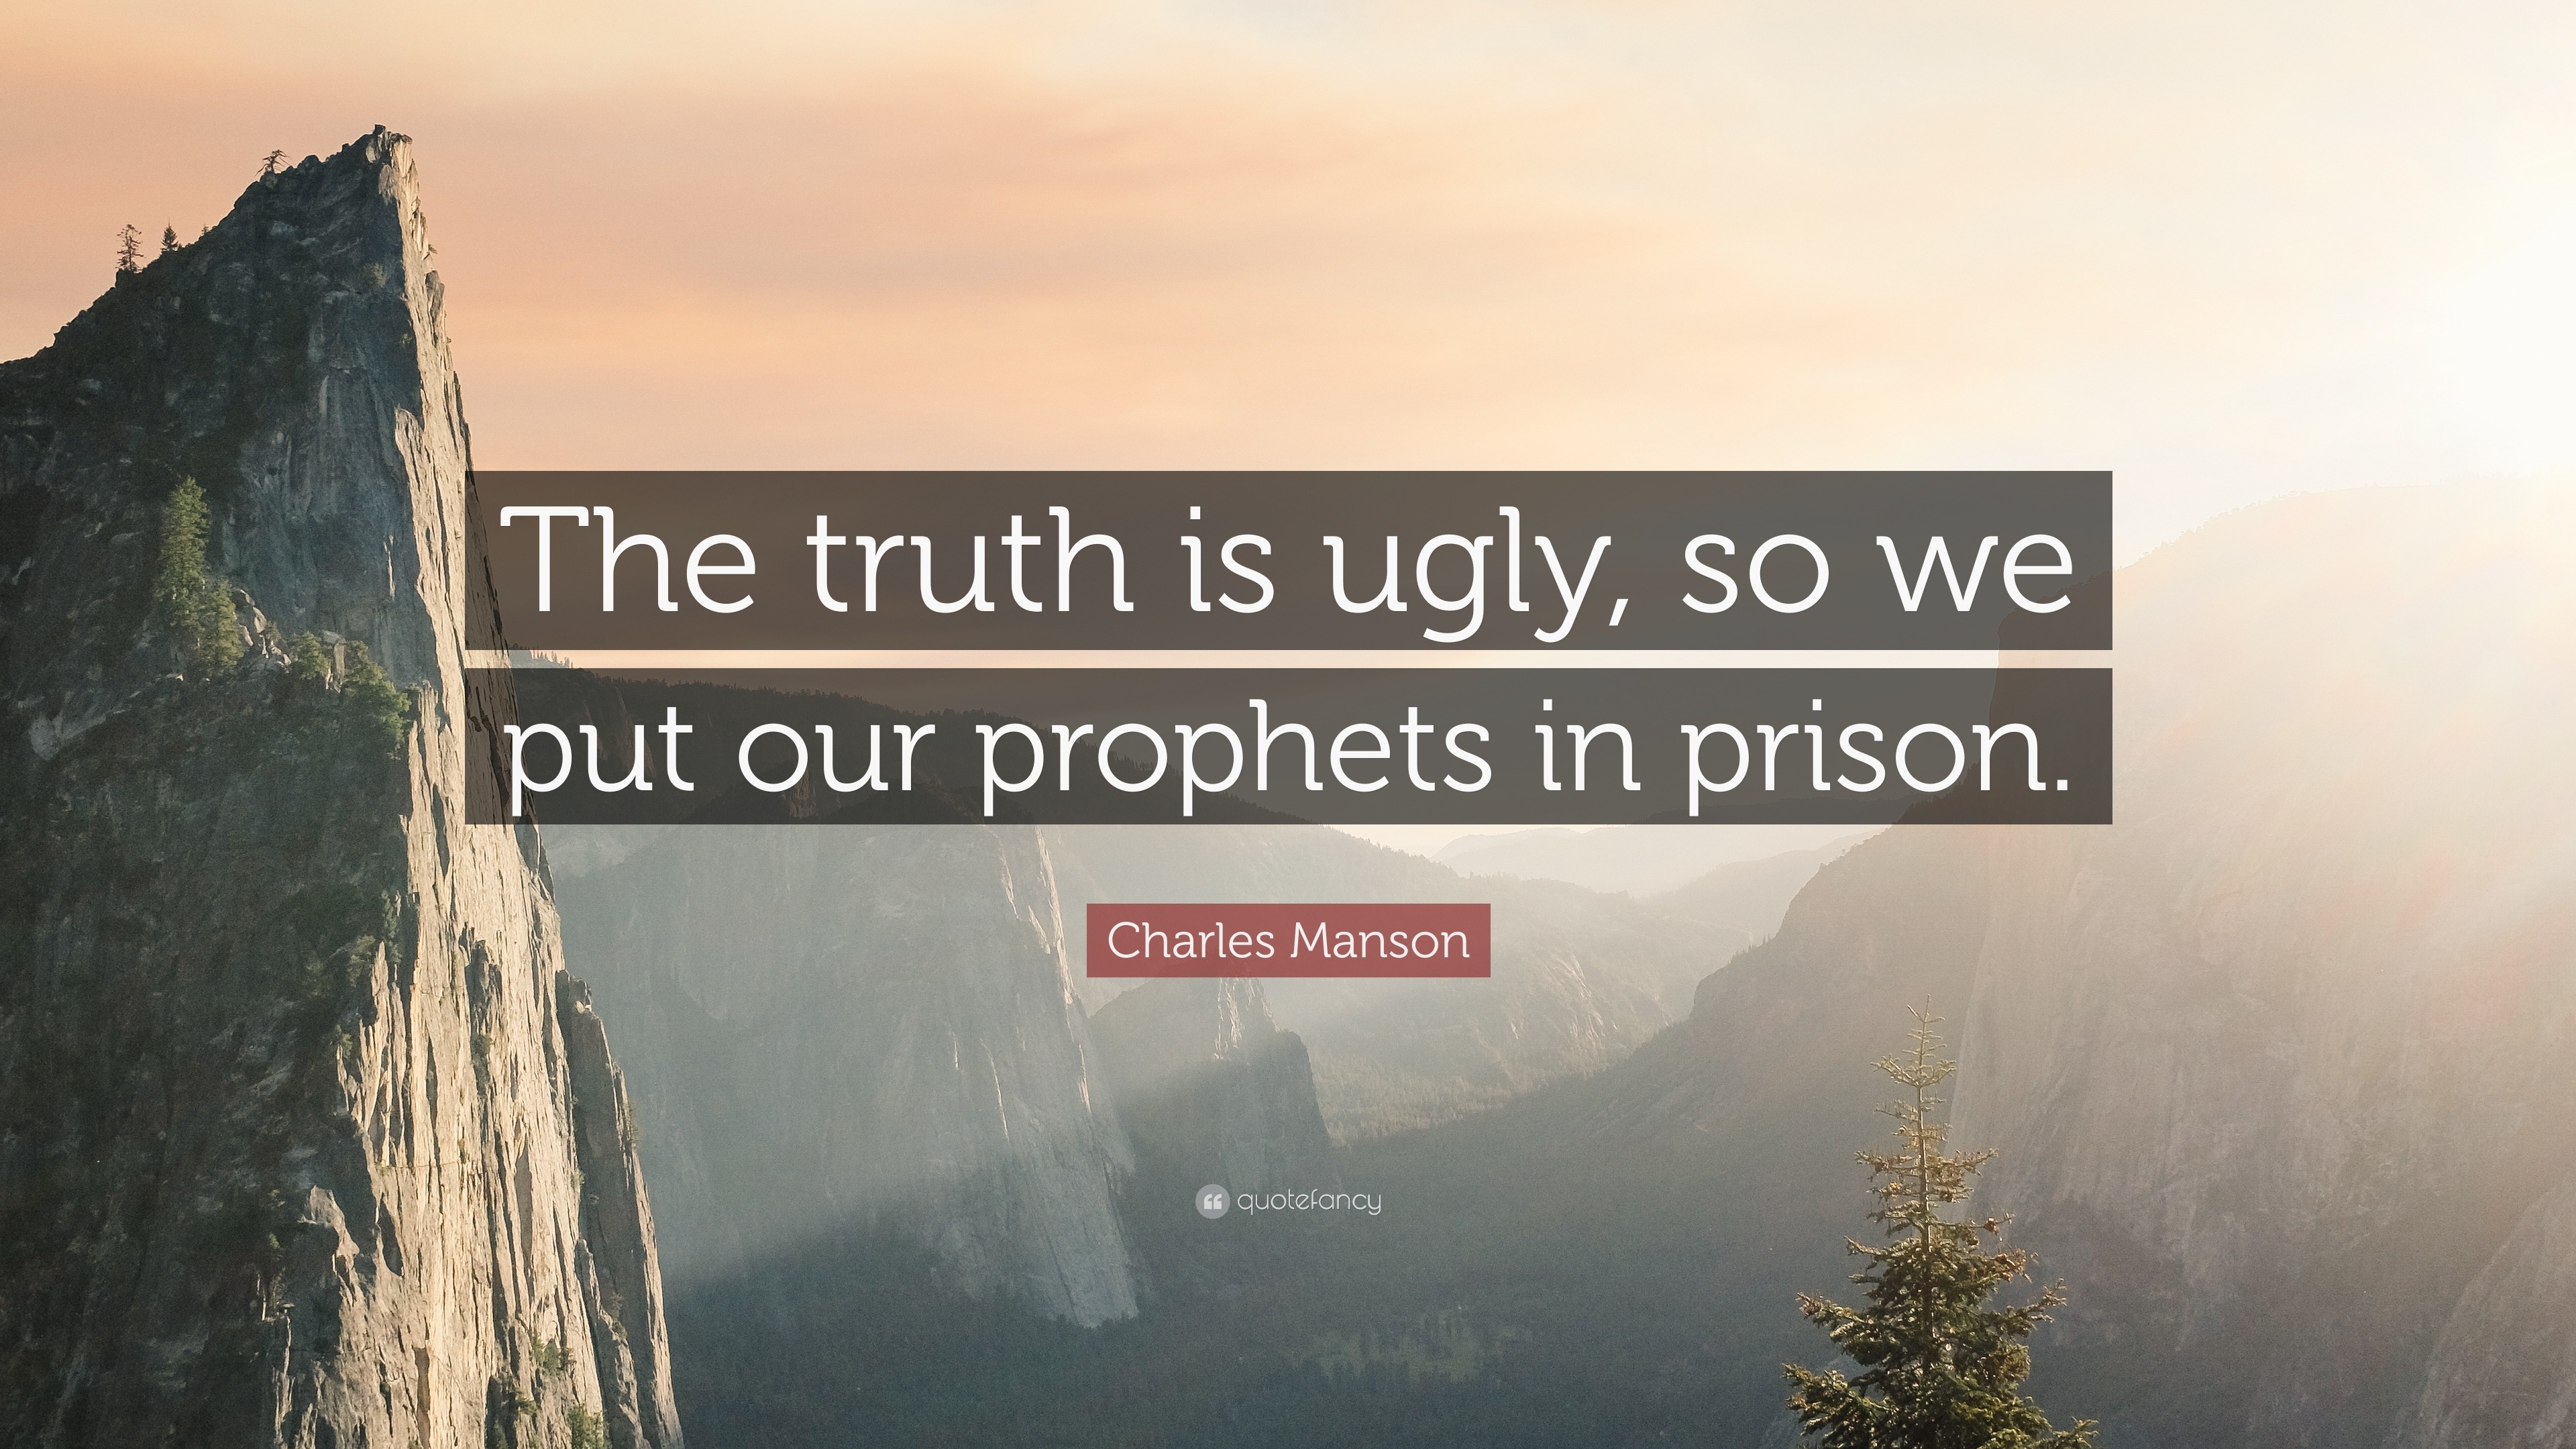 Charles Manson Quote: “The truth is ugly, so we put our prophets in